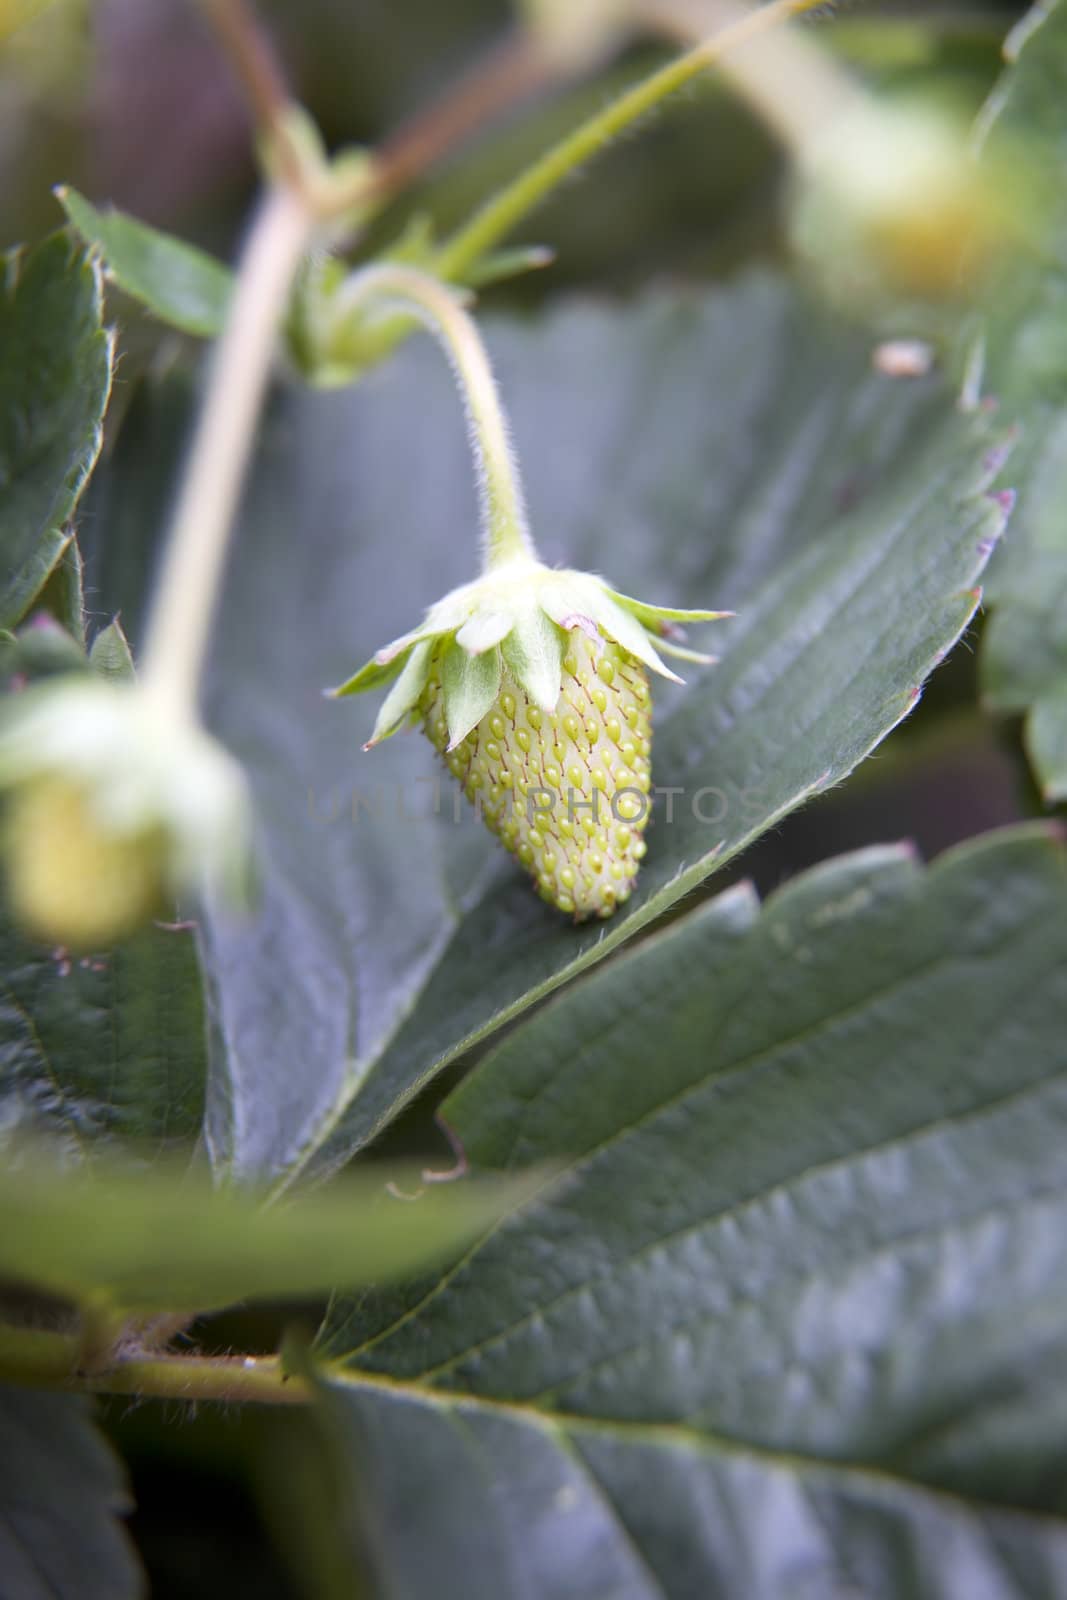 Small and green strawberry on plant